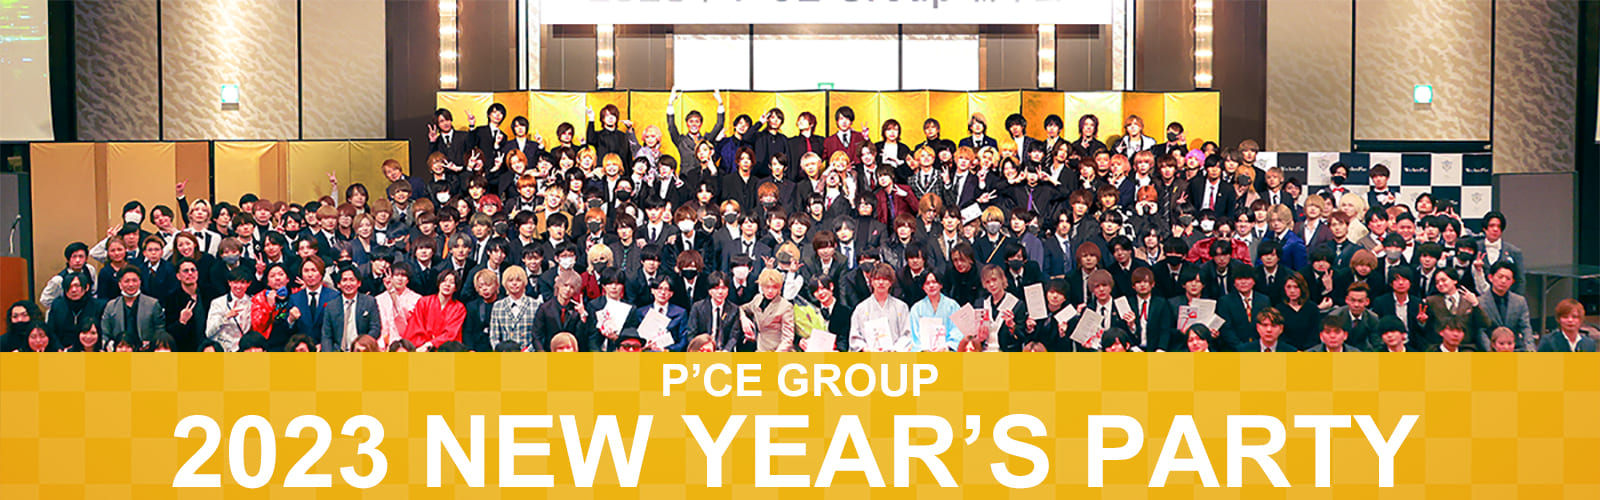 P’CEGroup 2023 NEW YEAR&#39;S PARTY